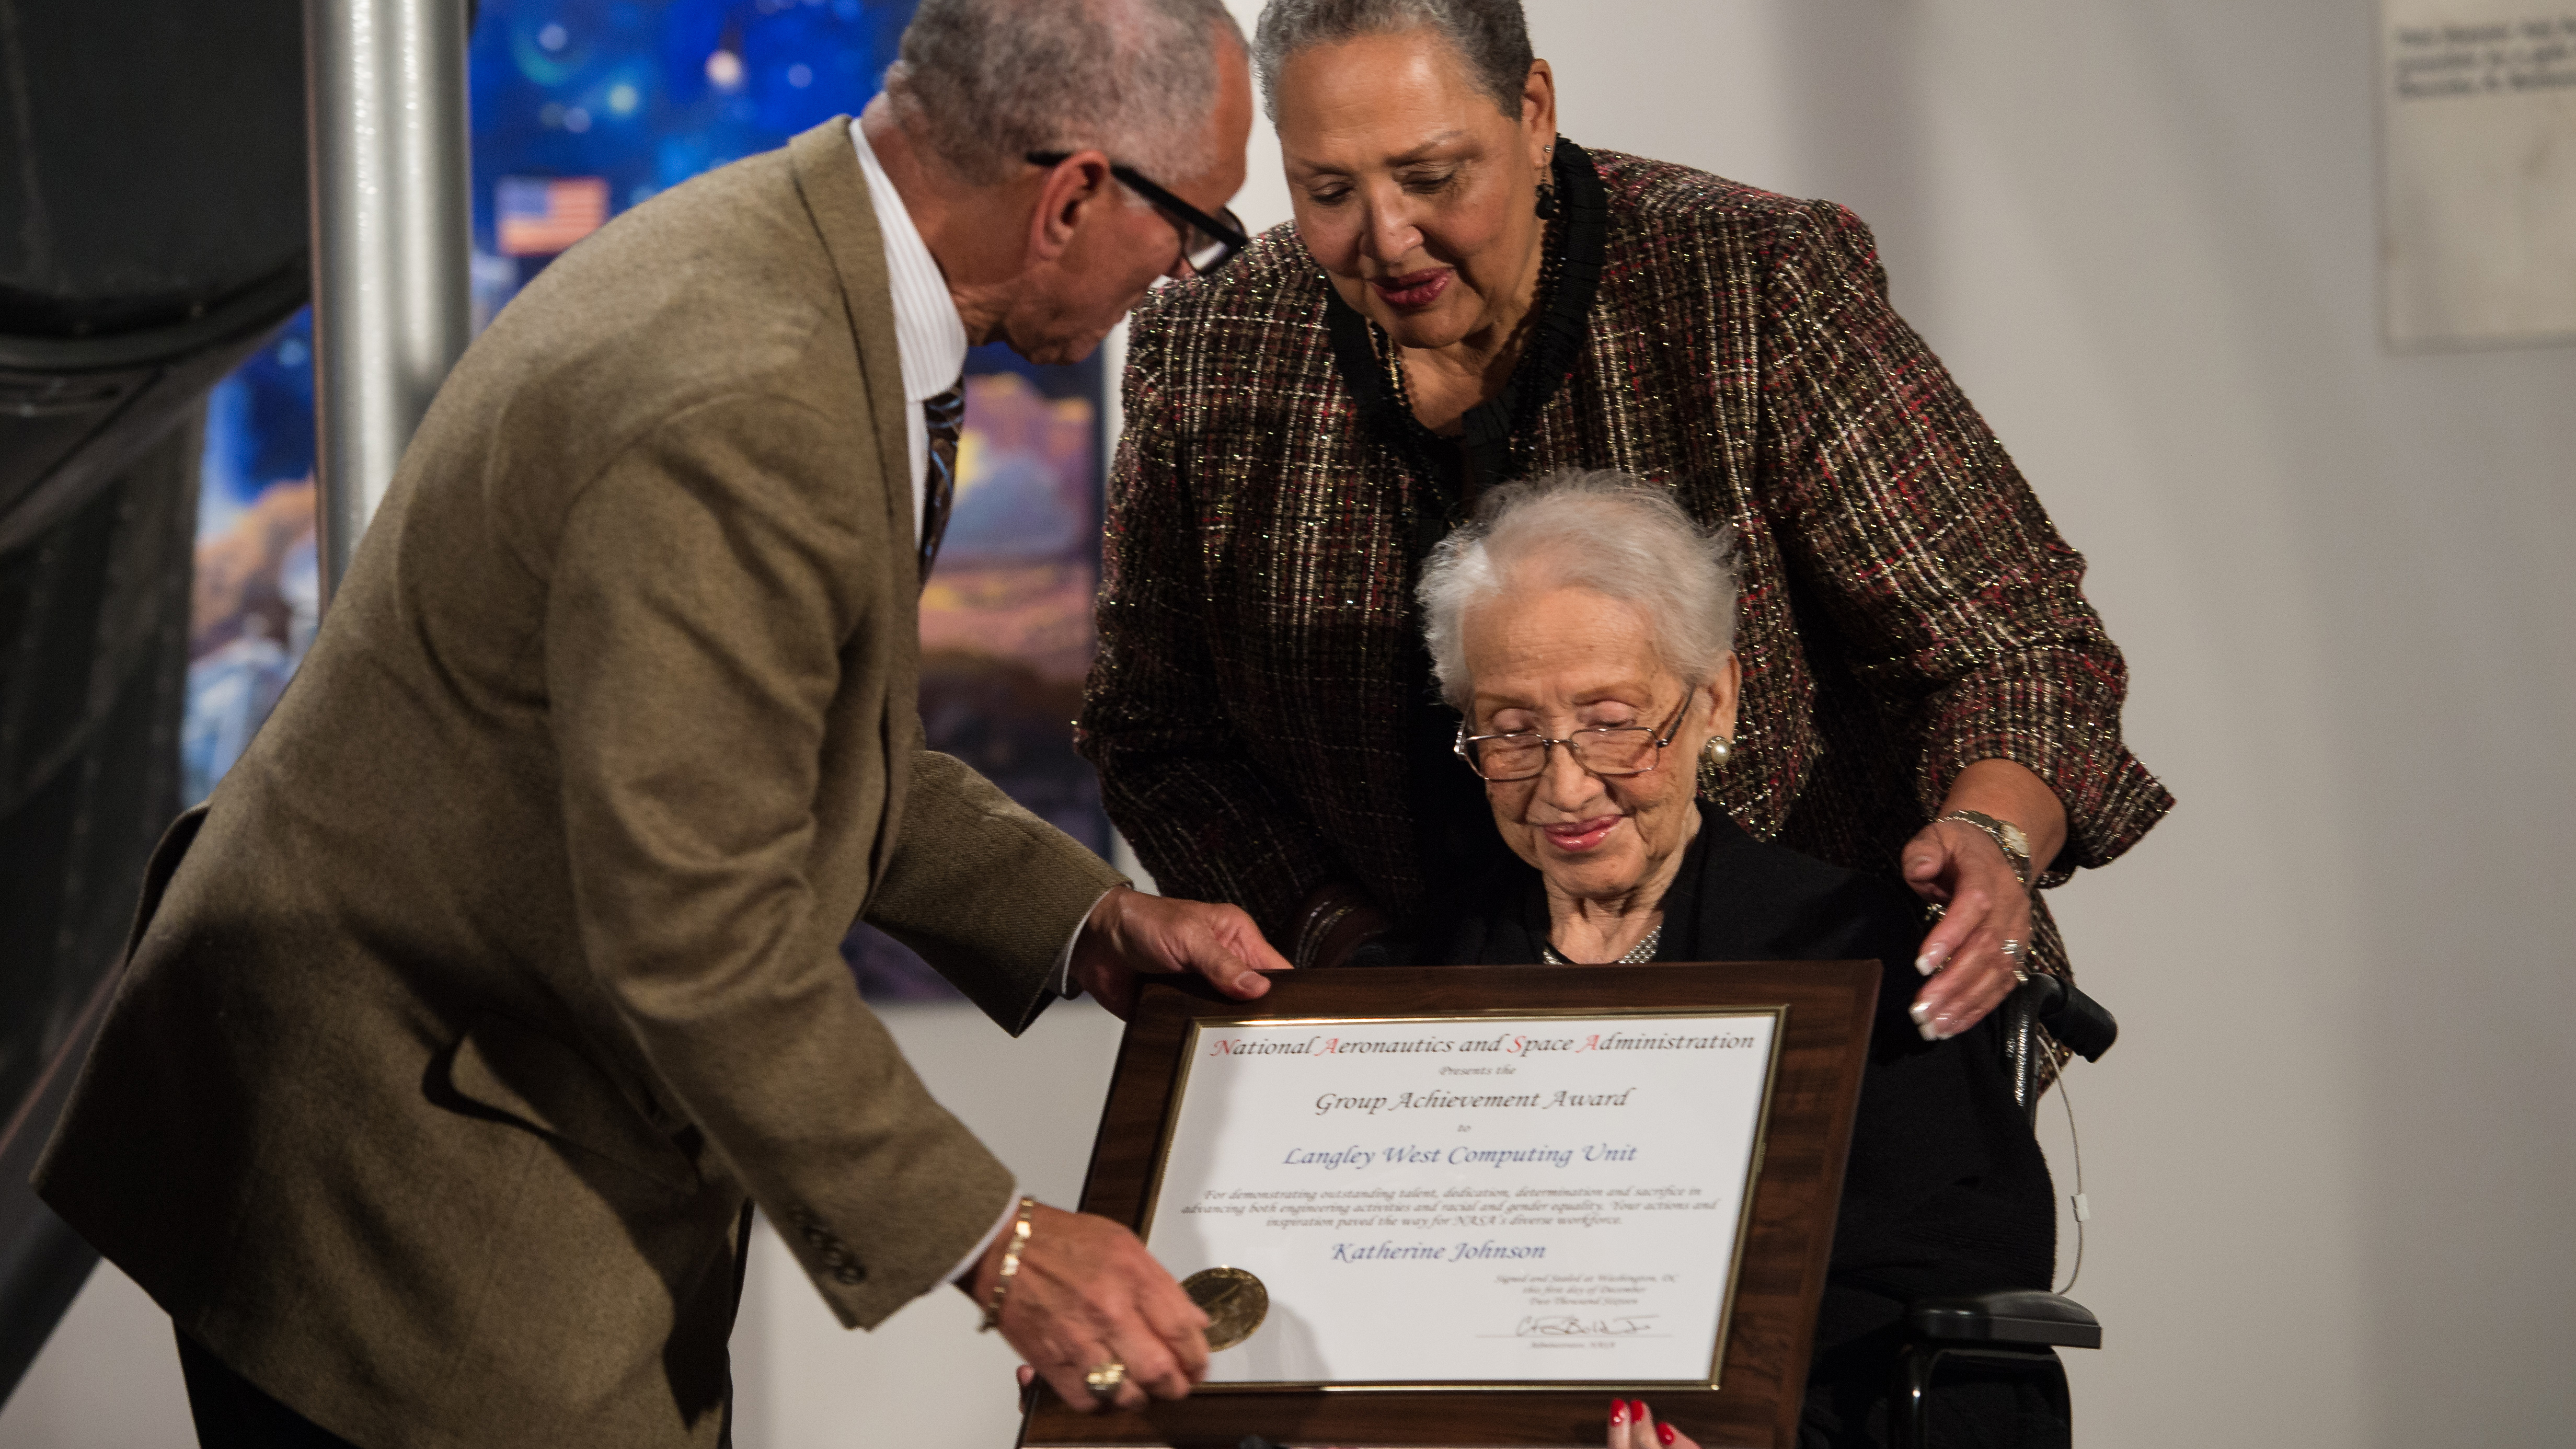 NASA Administrator Charles Bolden presents an award to Katherine Johnson, the African American mathematician, physicist, and space scientist, who calculated flight trajectories for John Glenn's first orbital flight in 1962, at a reception to honor members of the segregated West Area Computers division of Langley Research Center on Thursday, Dec. 1, 2016, at the Virginia Air and Space Center in Hampton, VA. Afterward, the guests attended a premiere of 'Hidden Figures' a film which stars Taraji P. Henson as Katherine Johnson, Octavia Spencer as Dorothy Vaughan, and Janelle Monae as Mary Jackson. Photo Credit: (NASA/Aubrey Gemignani)